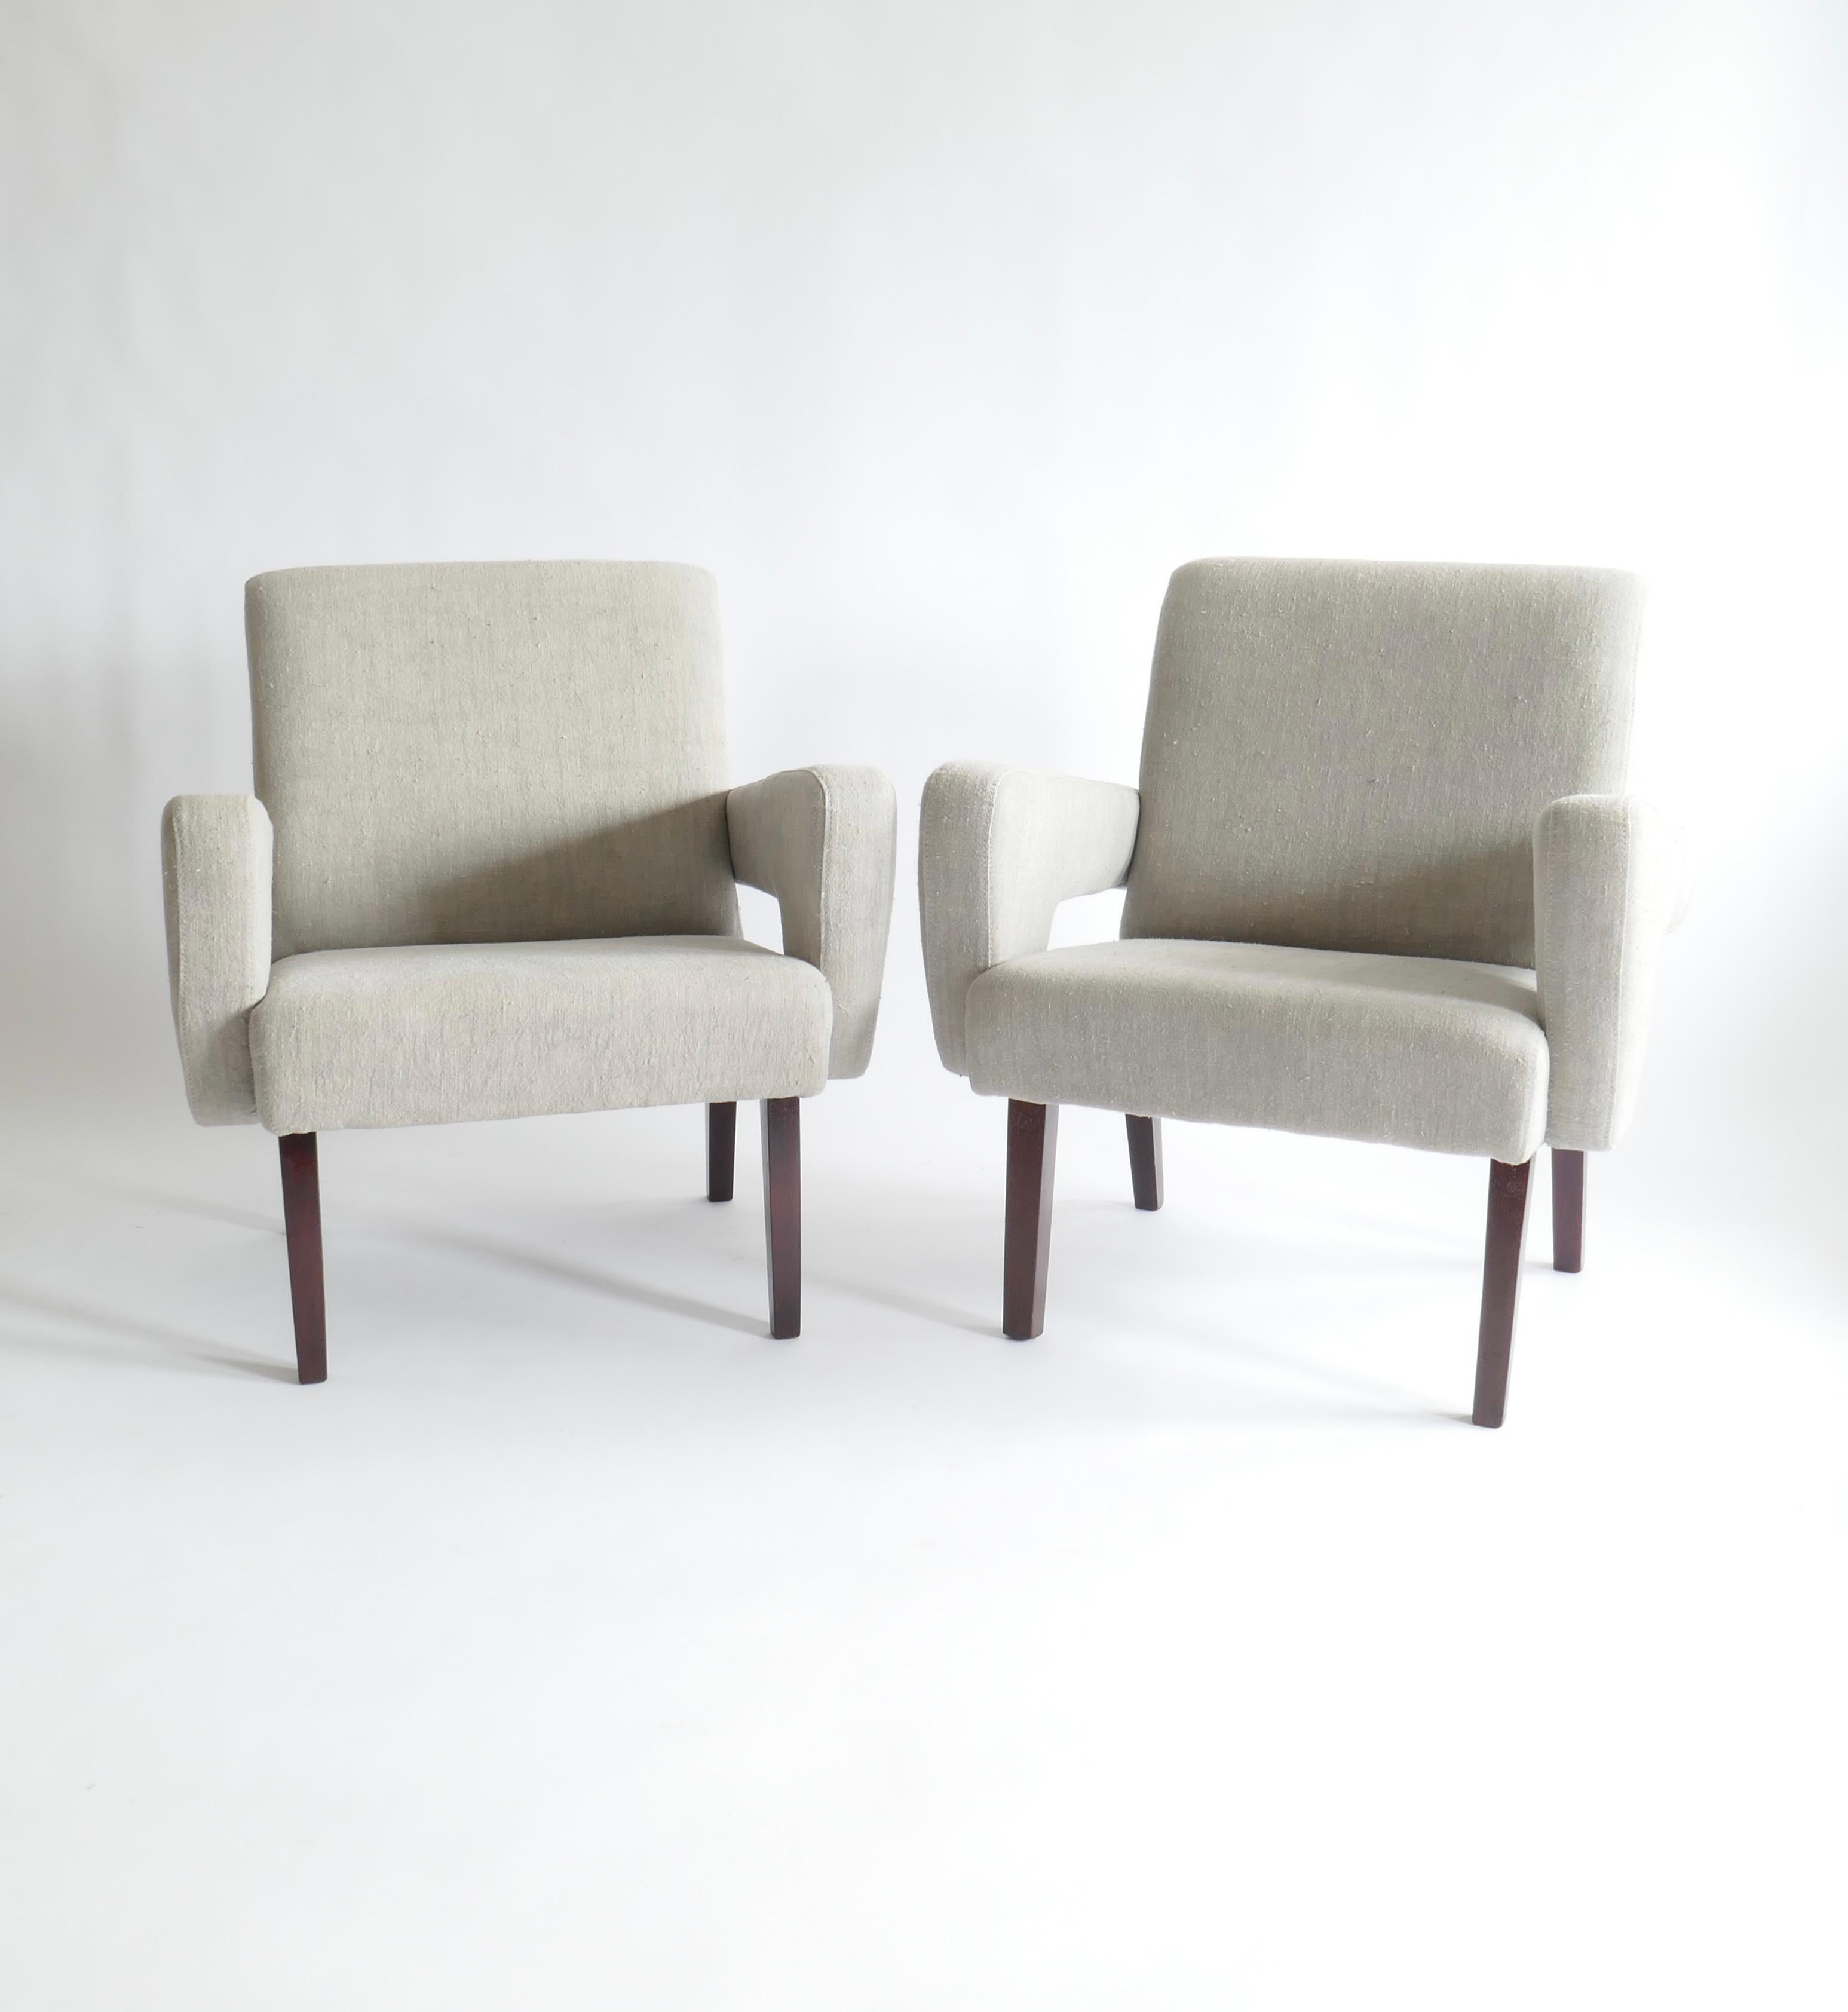 Italian Pair of Brutalist Armchairs Upholstered in Vintage French Light Grey Linen 1970s For Sale